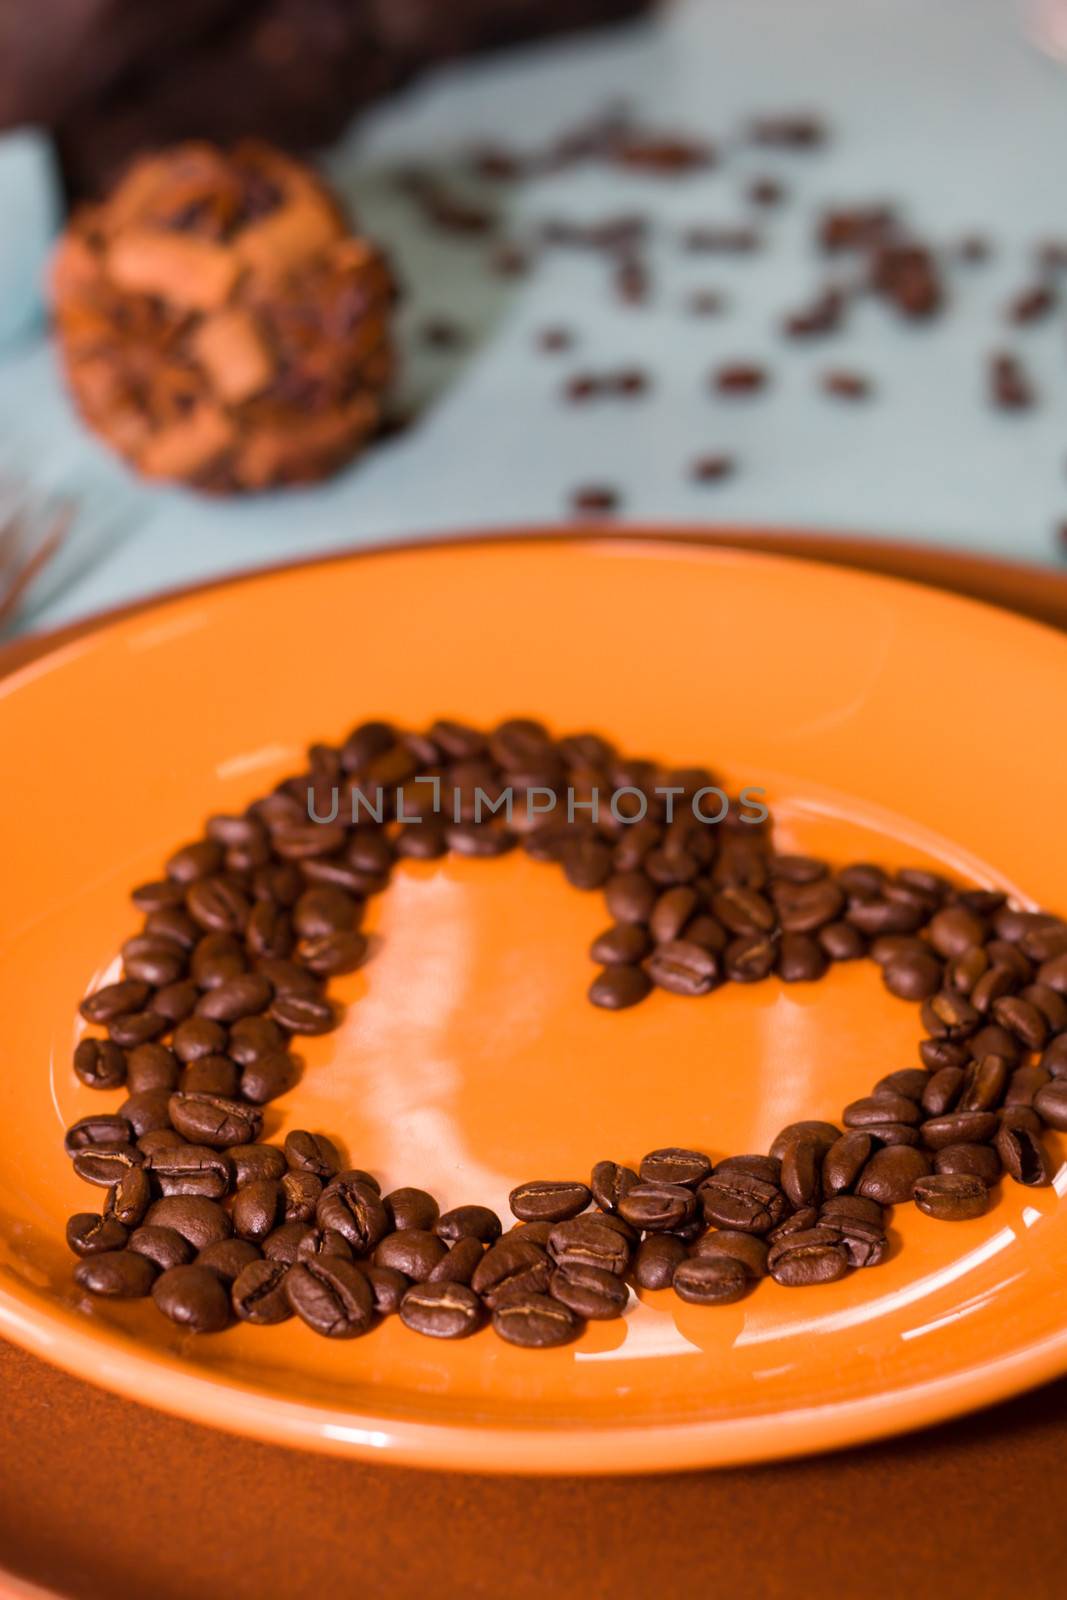 Coffeebeans. With love. by deamles